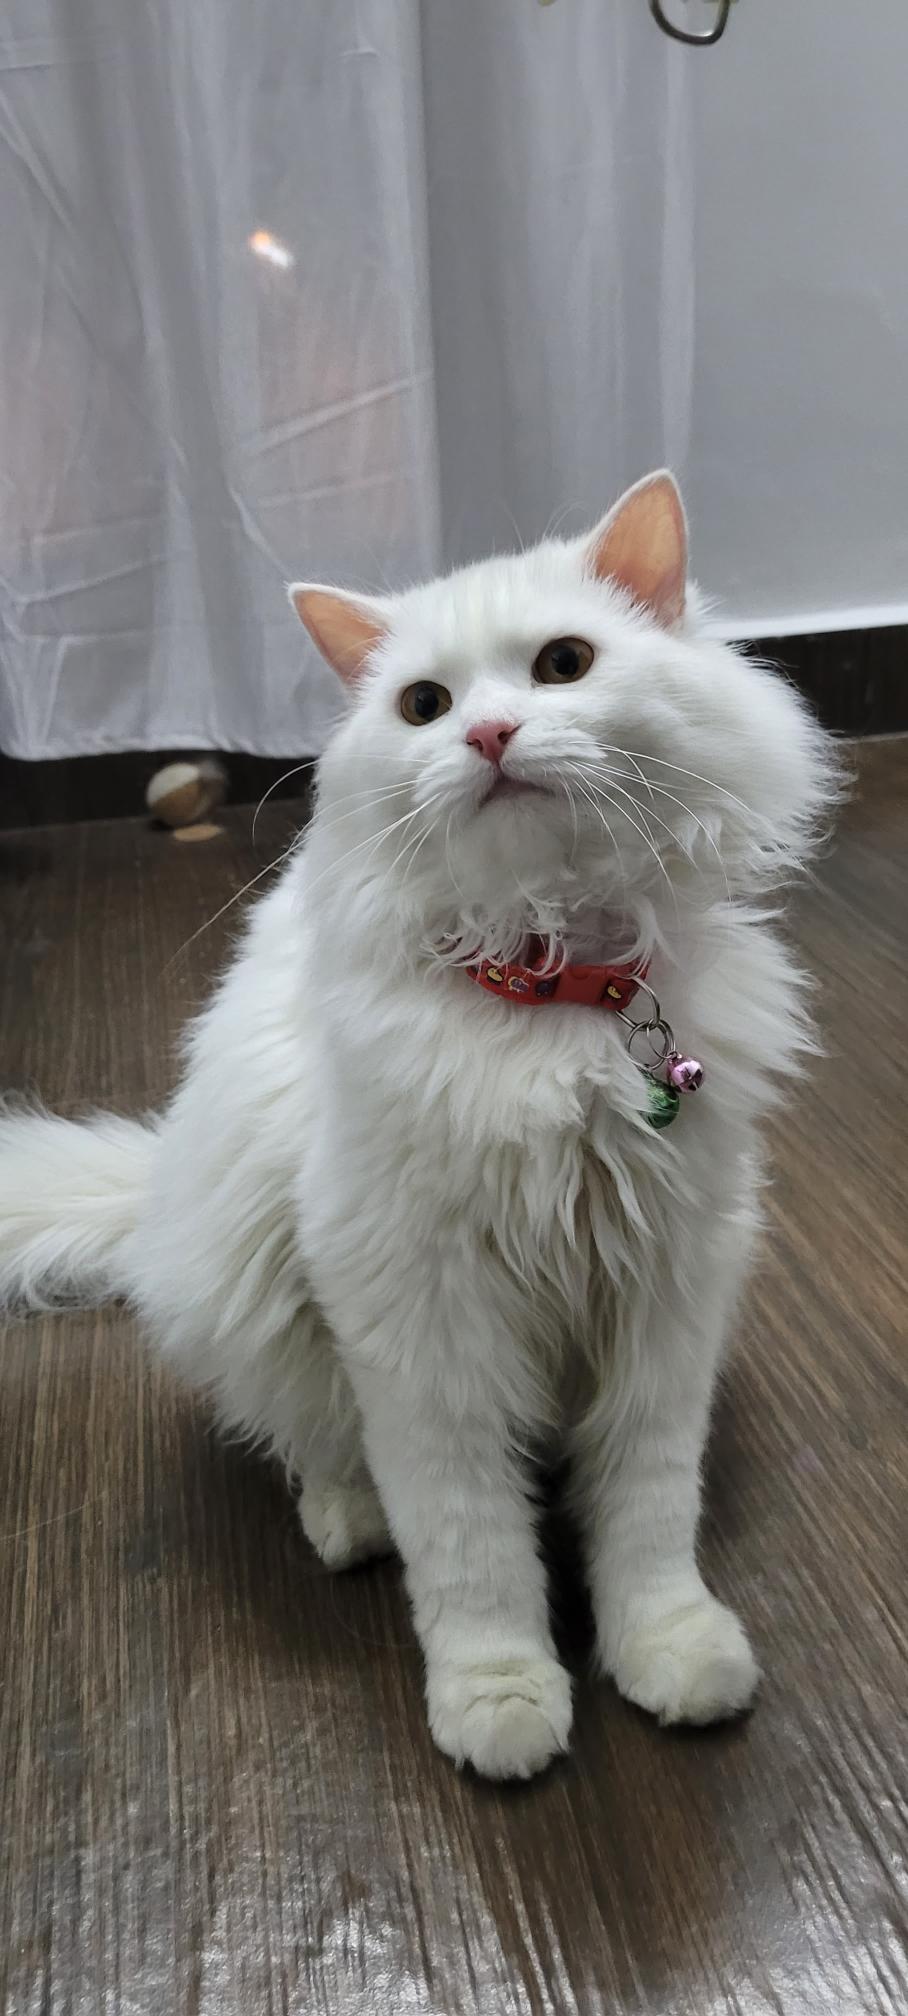 Looking for genuine cat lovers to adopt our persian cat